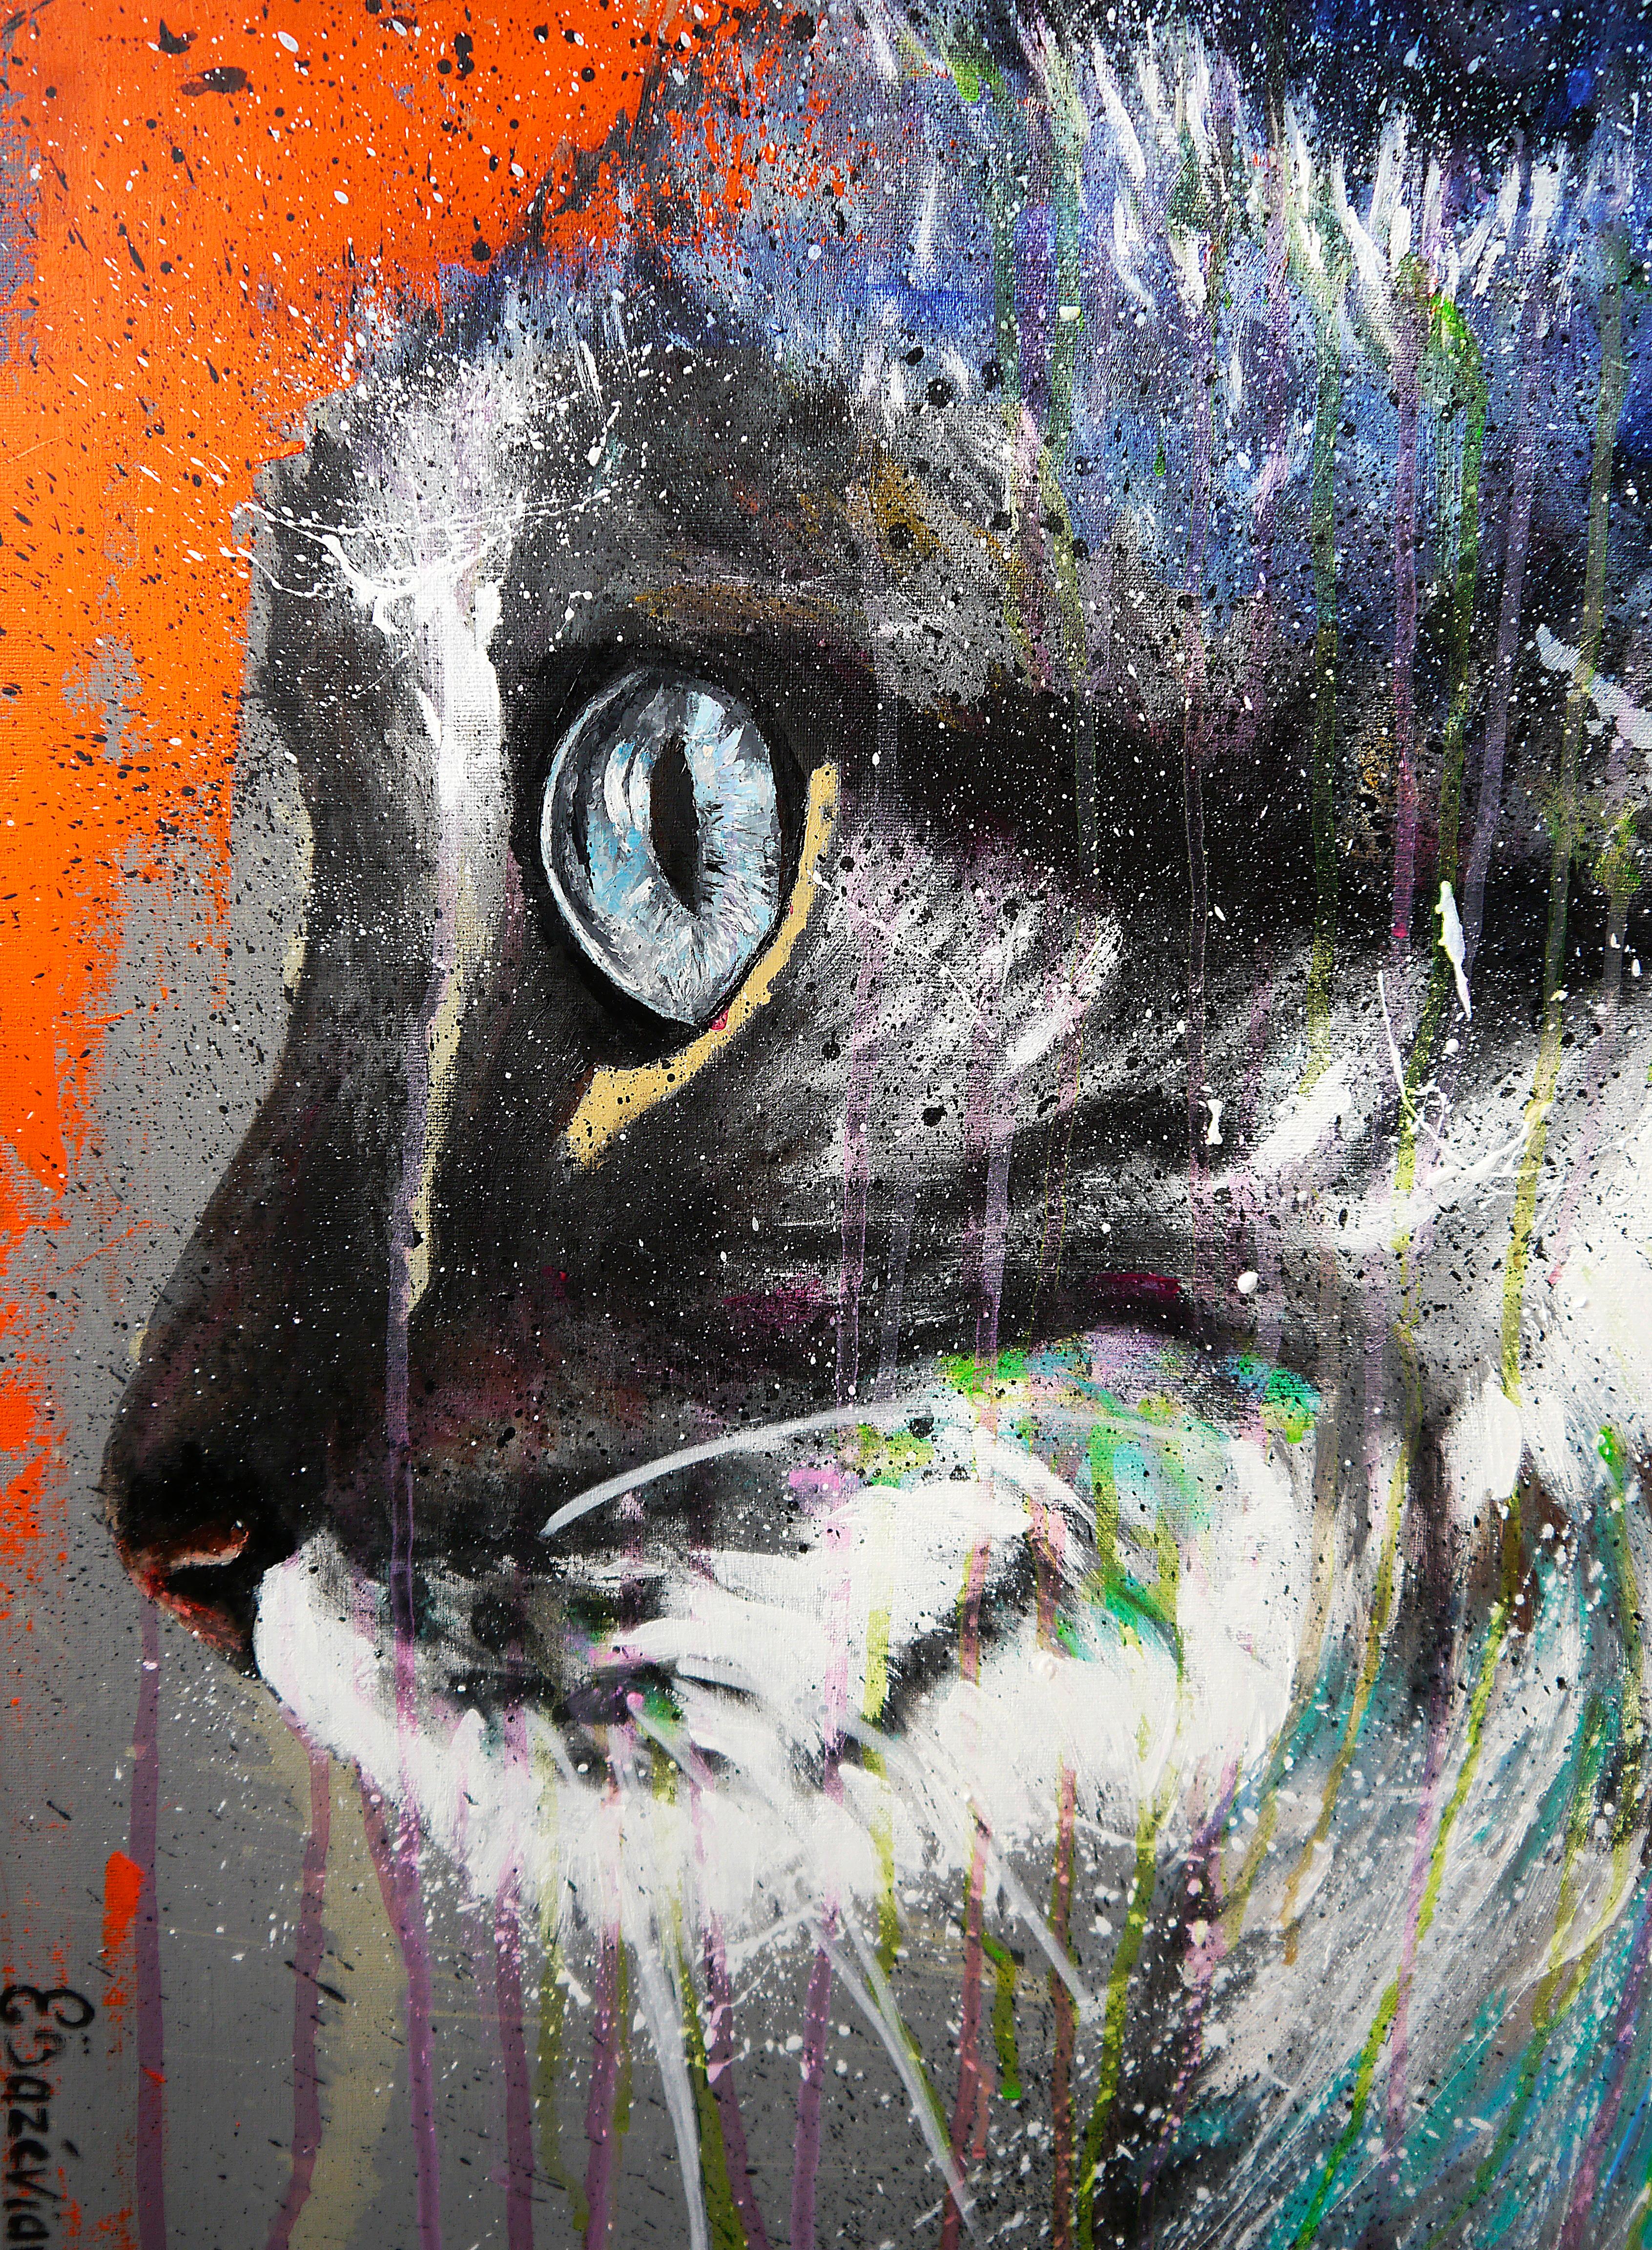 Animal Frieze me

Portrait - Closeup of cat
Technique: oil, acrylic, and ink  on canvas F30 92x73cm ■■ 36,2x28,7 inch

》》R E A D Y -- T O -- H A N G《《


❶ → Original signed work. Certificate of authenticity included.

❷ → Protection for shipping